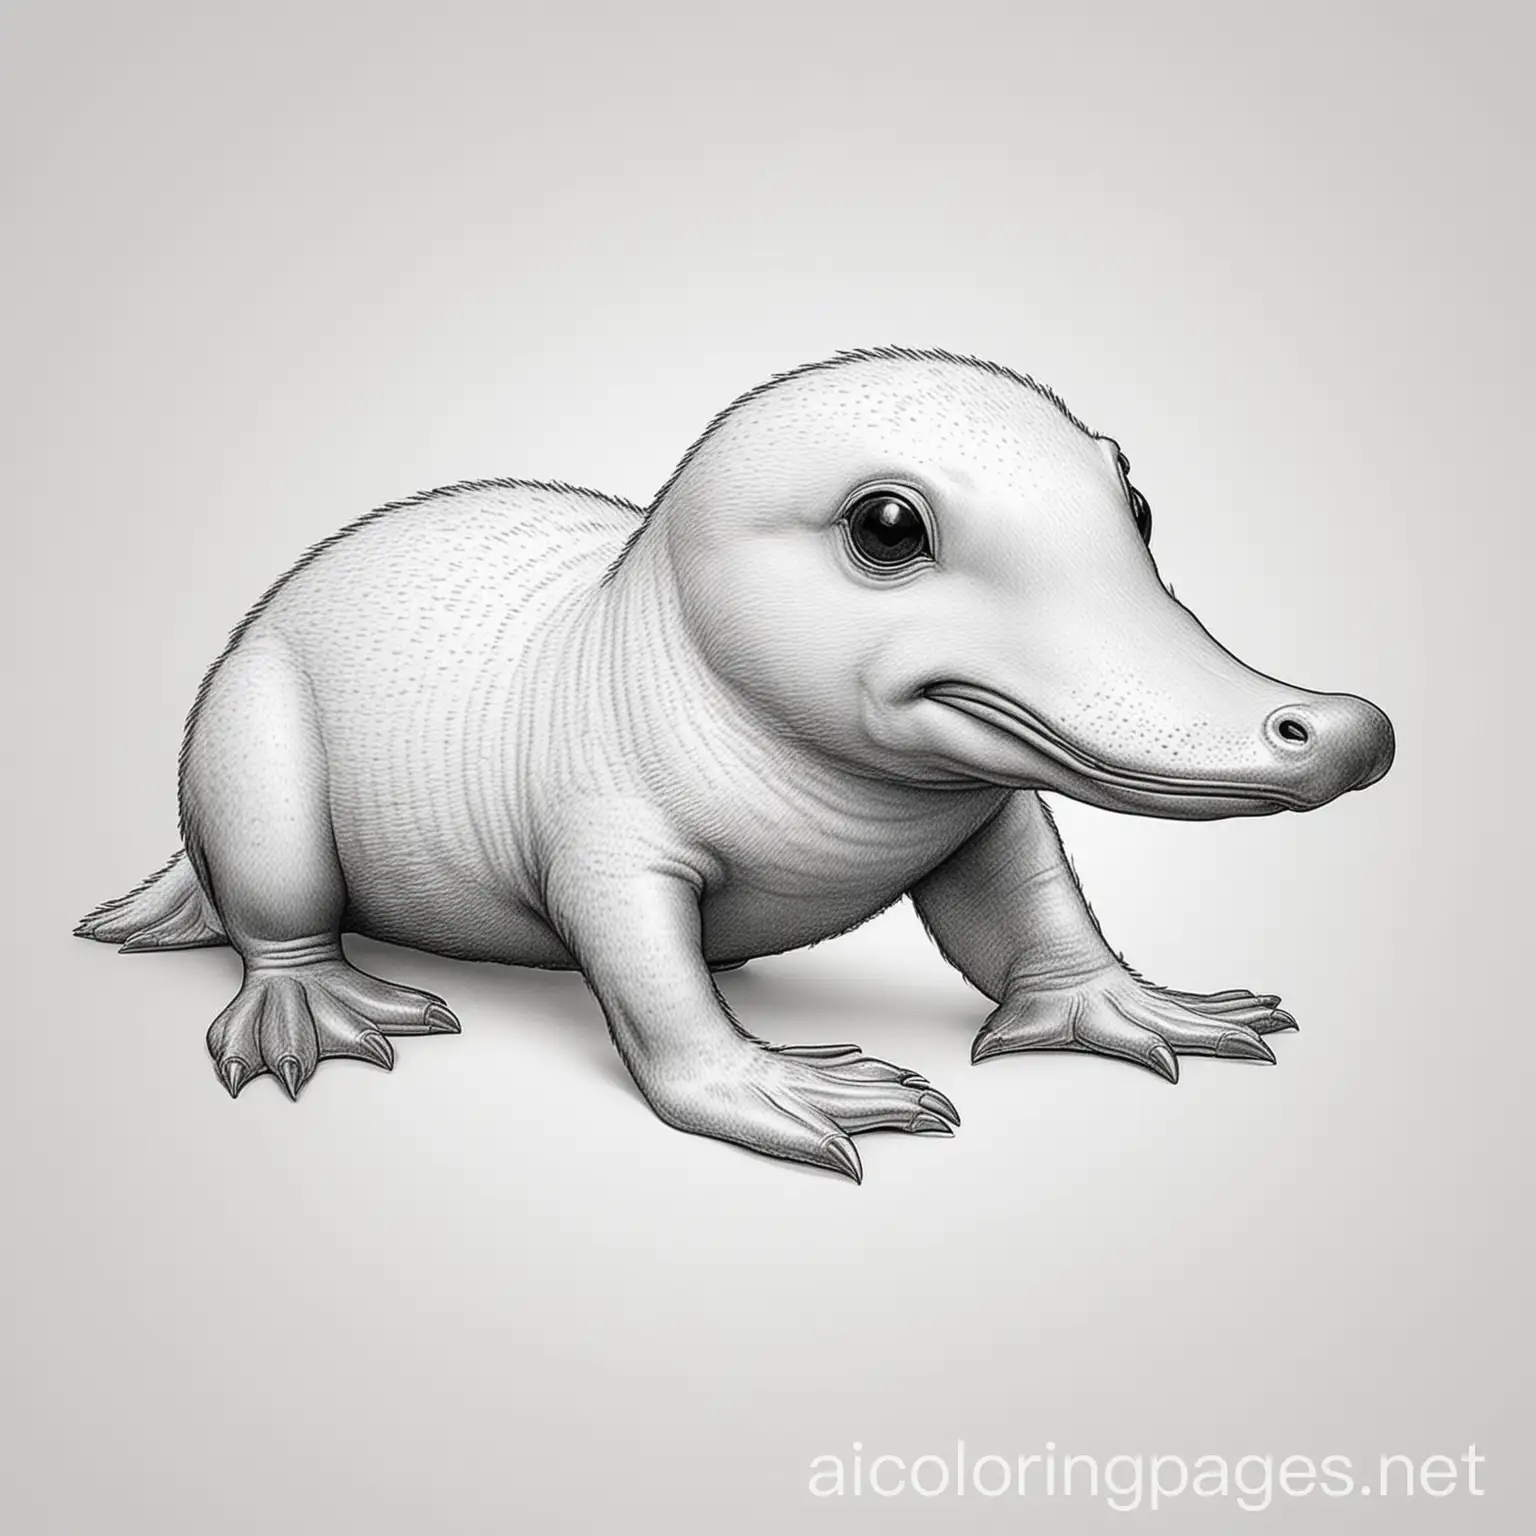 Cute-Platypus-Coloring-Page-Simple-Line-Art-on-White-Background